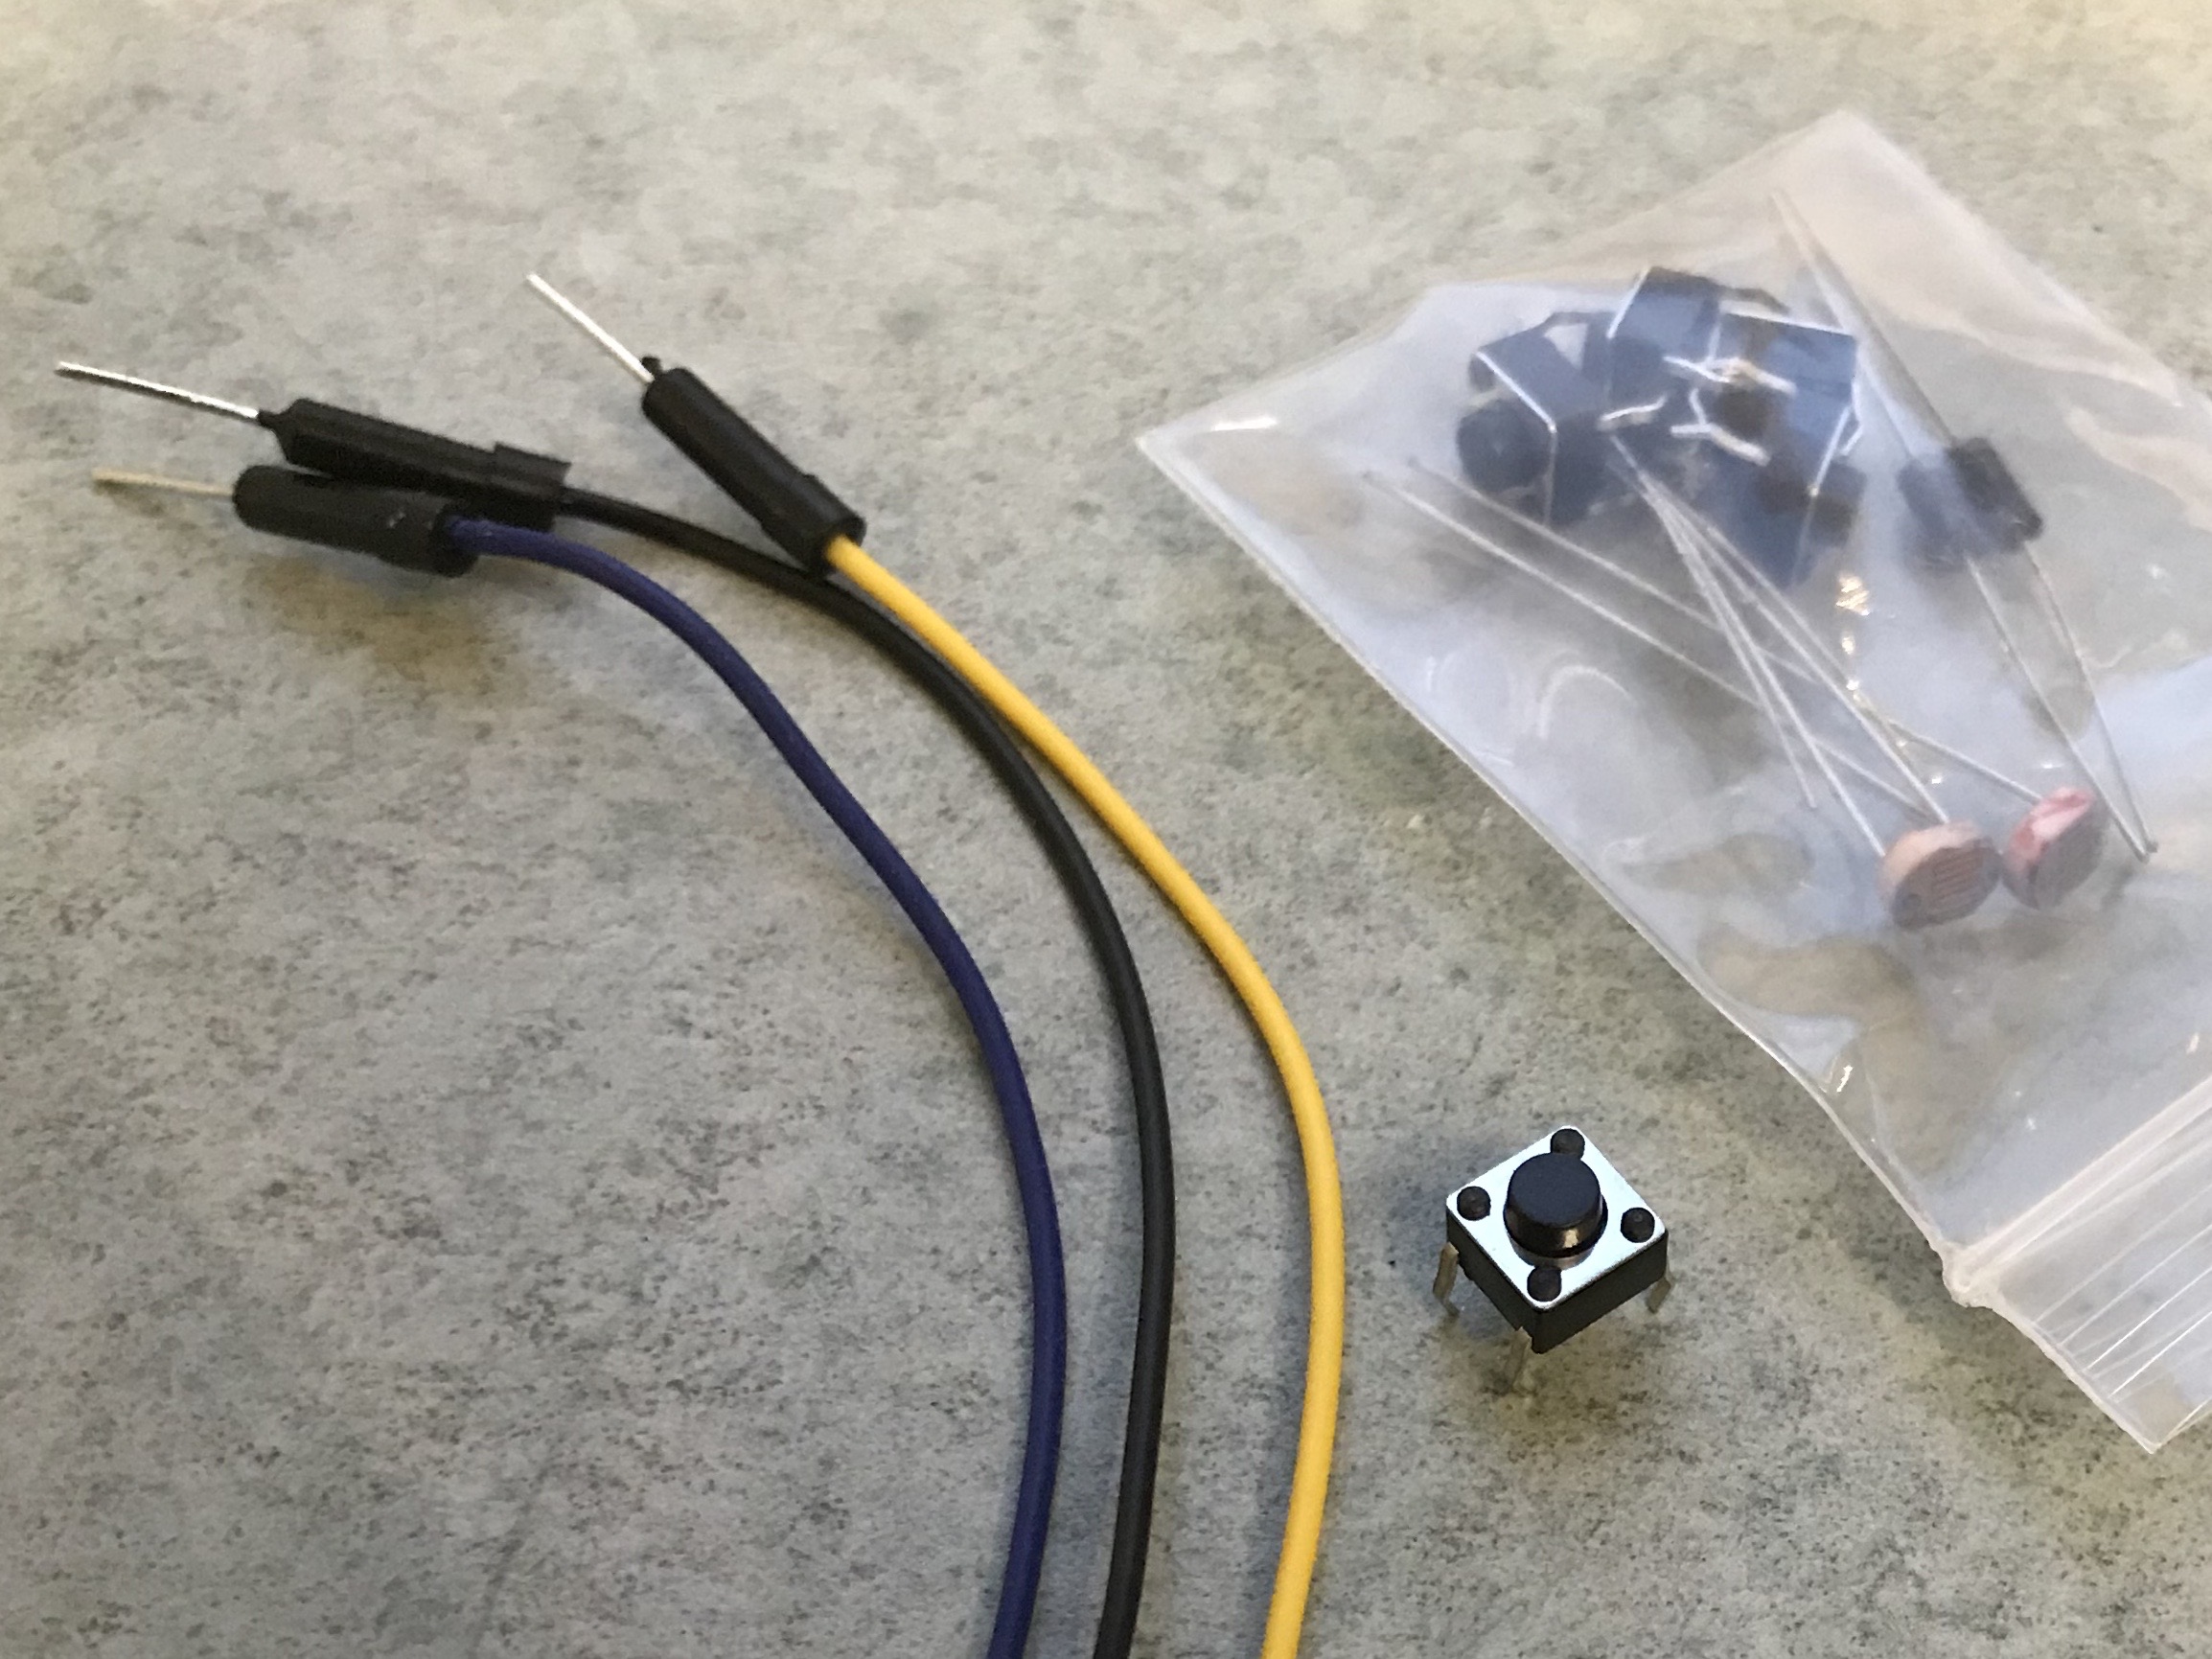 The materials to wire up the button.